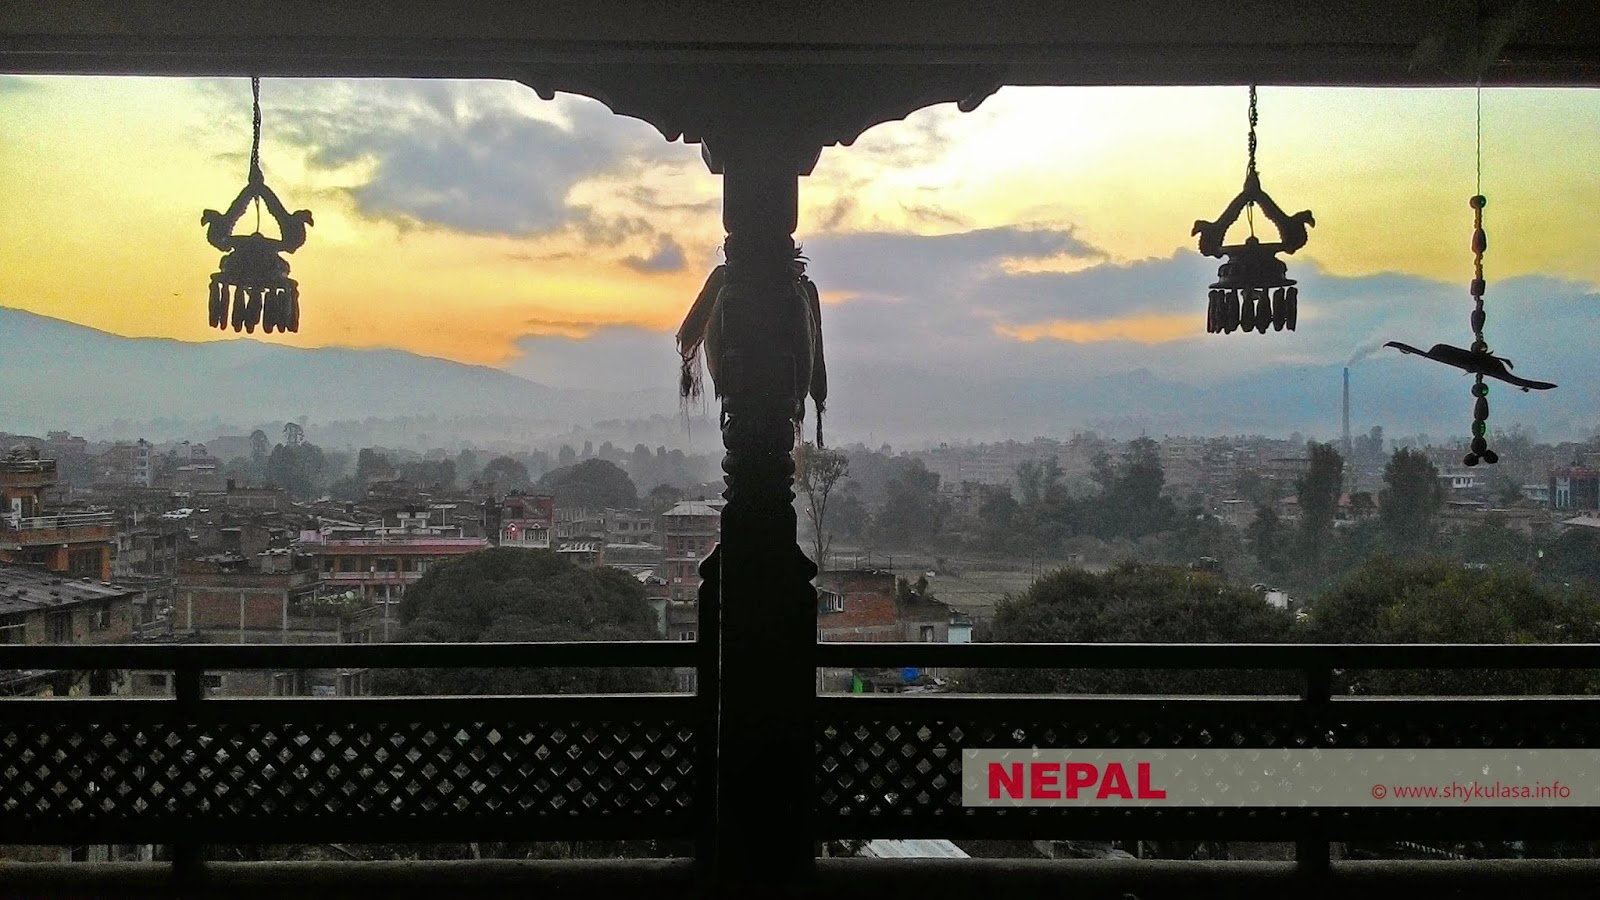 A new day in Bhaktapur, Nepal